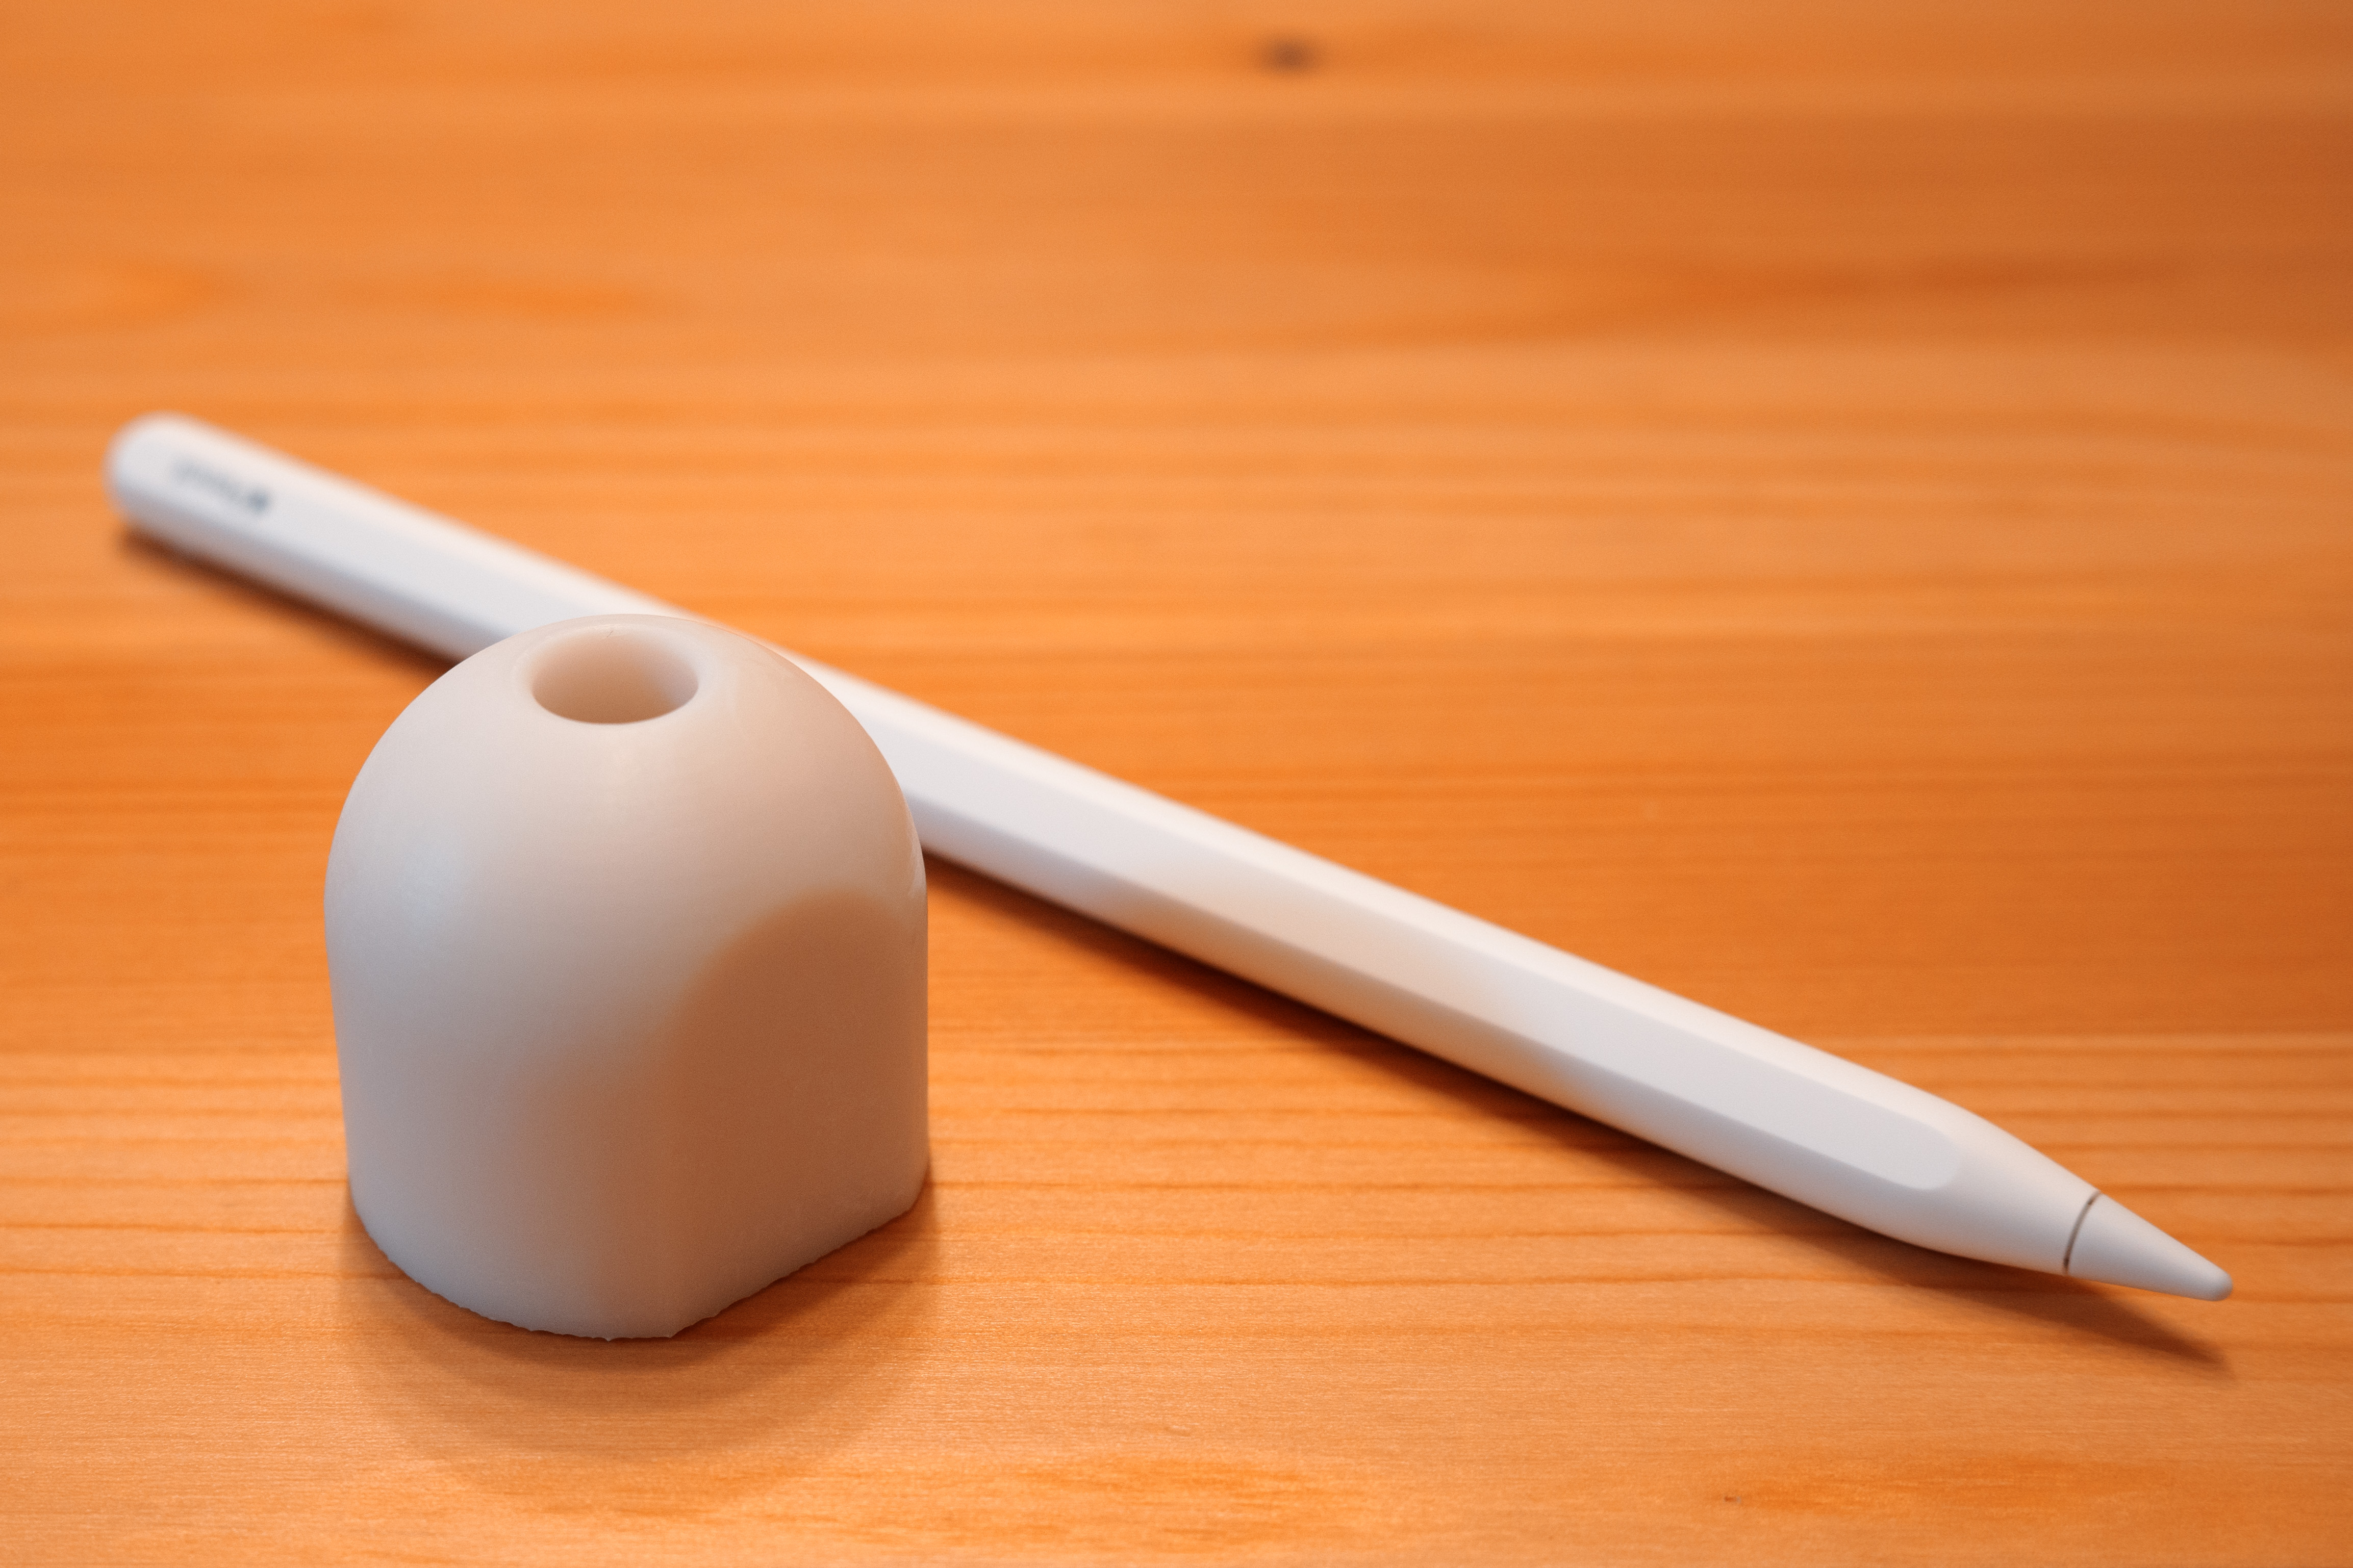 Apple pencil stand